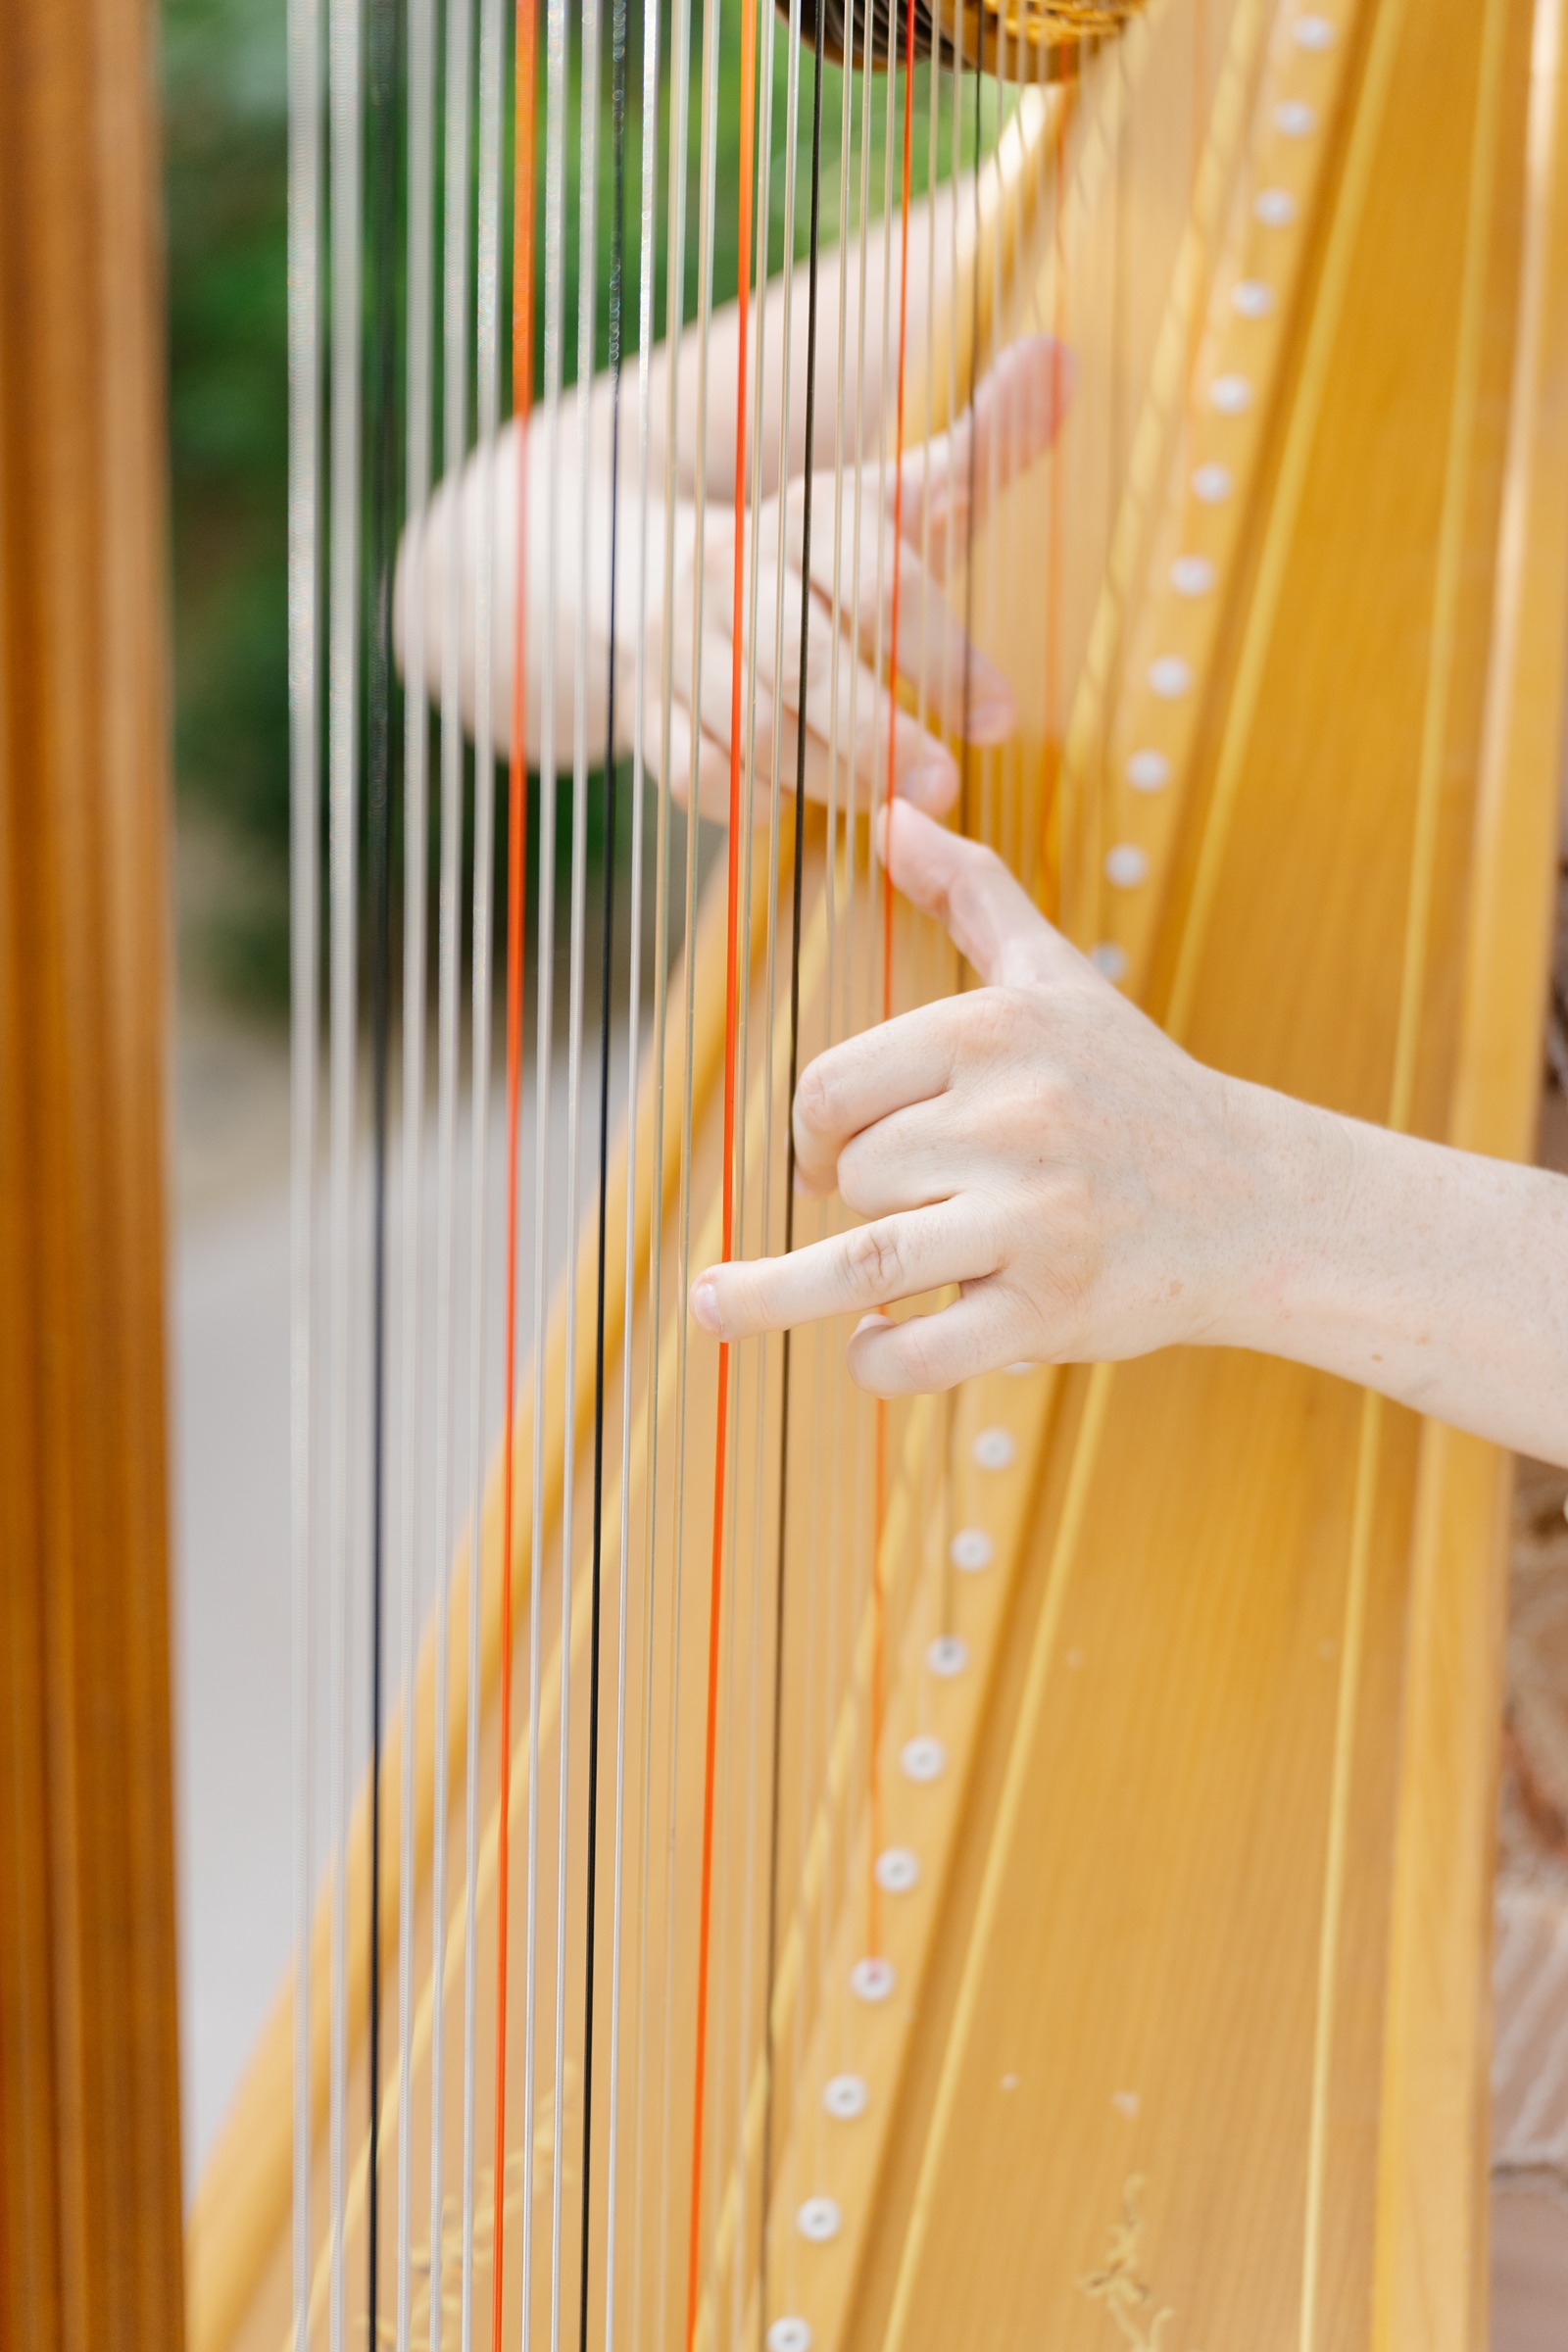 Harp music for a wedding: harpist's hands at the strings